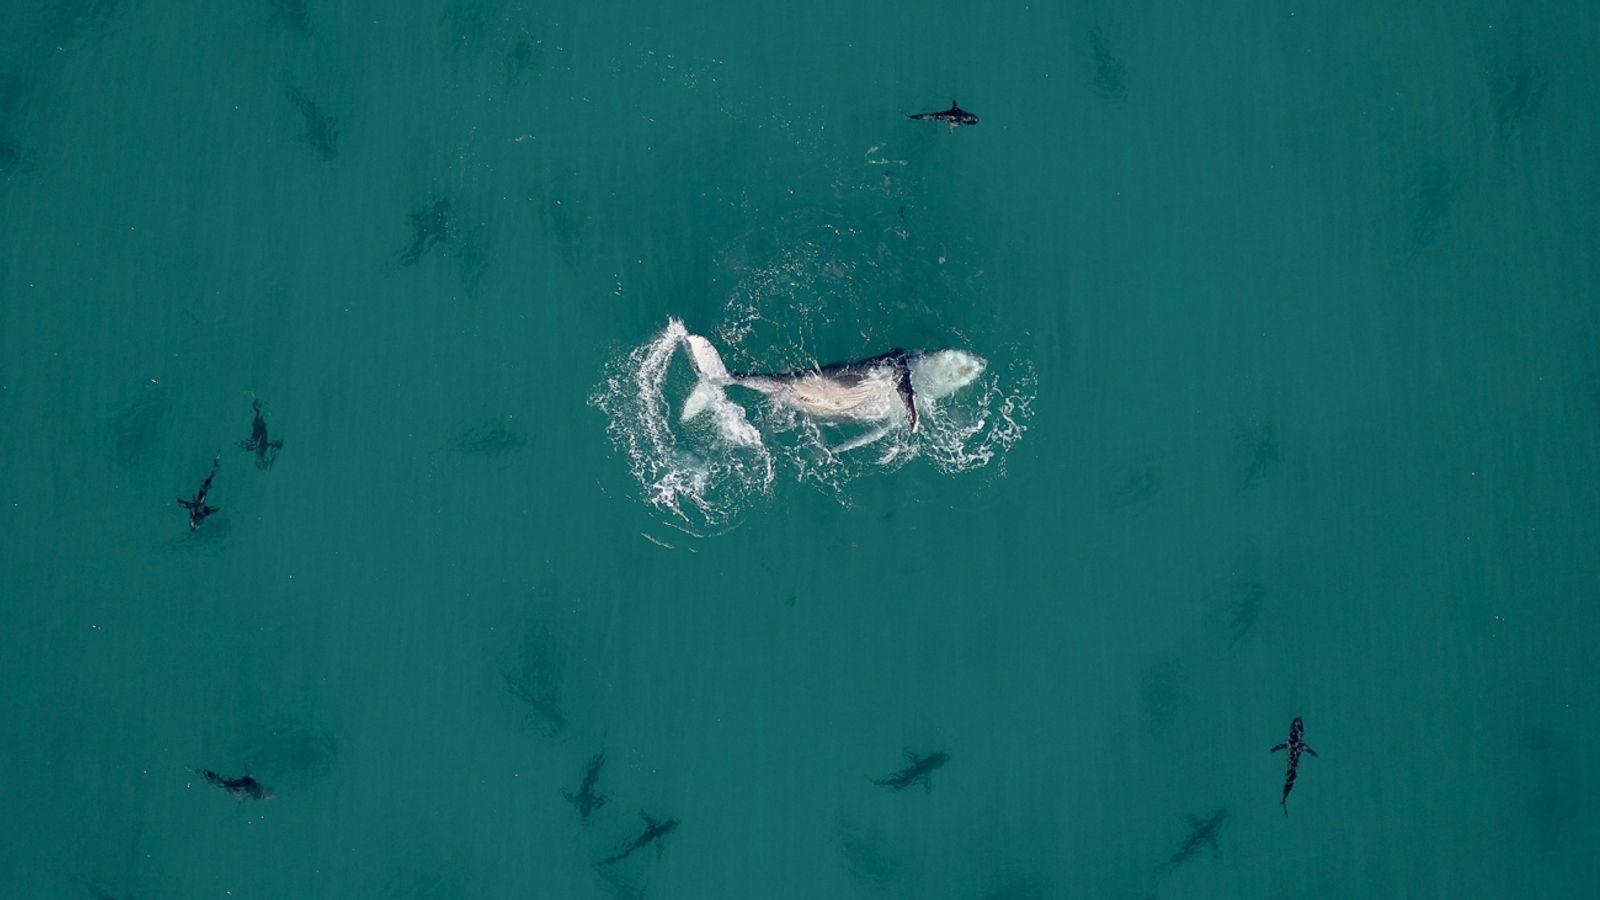 Drone Photo Awards 2020: Extraordinary image of shark in heart-shaped  school of fish wins top prize, UK News